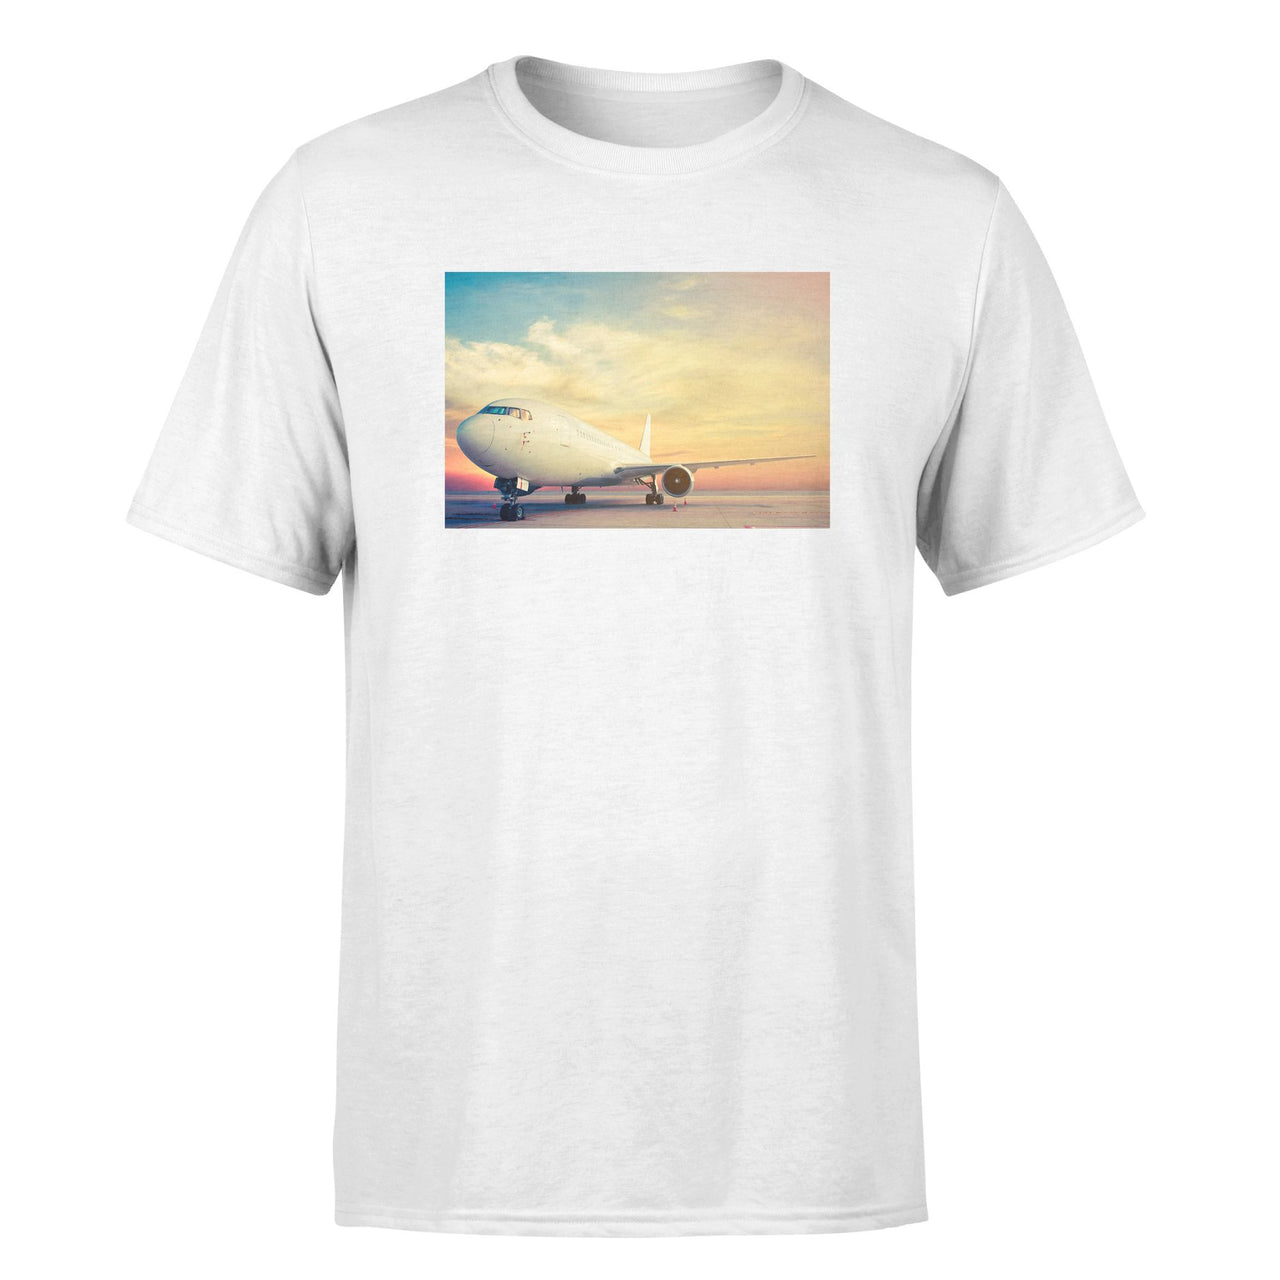 Parked Aircraft During Sunset Designed T-Shirts